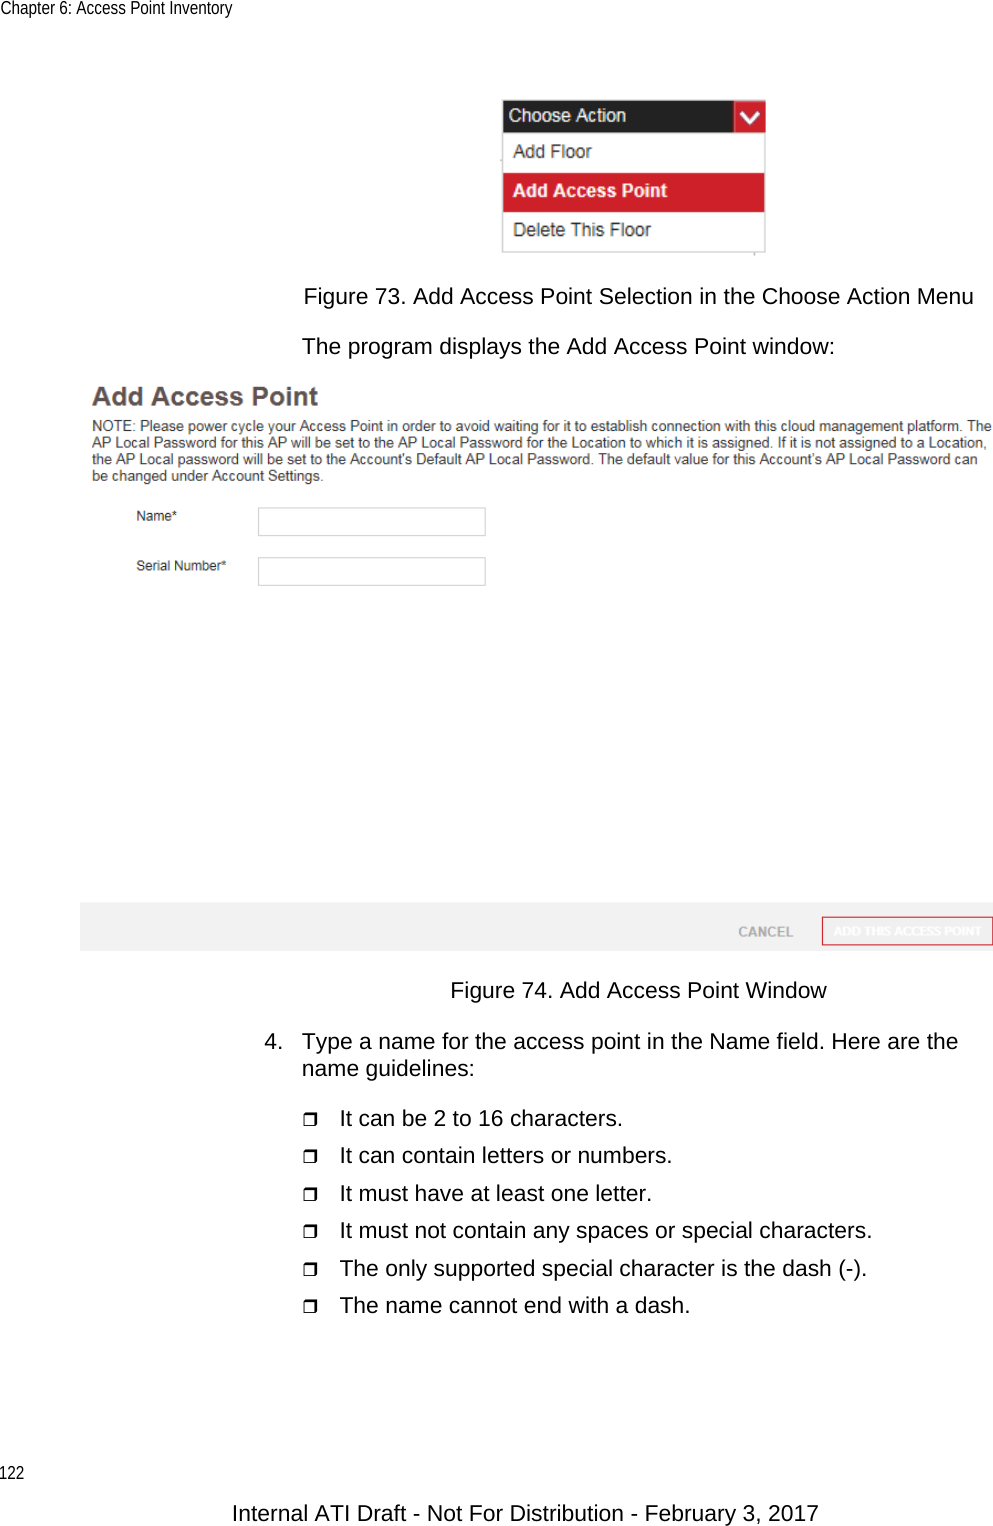 Chapter 6: Access Point Inventory122Figure 73. Add Access Point Selection in the Choose Action MenuThe program displays the Add Access Point window:Figure 74. Add Access Point Window4. Type a name for the access point in the Name field. Here are the name guidelines:It can be 2 to 16 characters.It can contain letters or numbers.It must have at least one letter.It must not contain any spaces or special characters.The only supported special character is the dash (-).The name cannot end with a dash.Internal ATI Draft - Not For Distribution - February 3, 2017